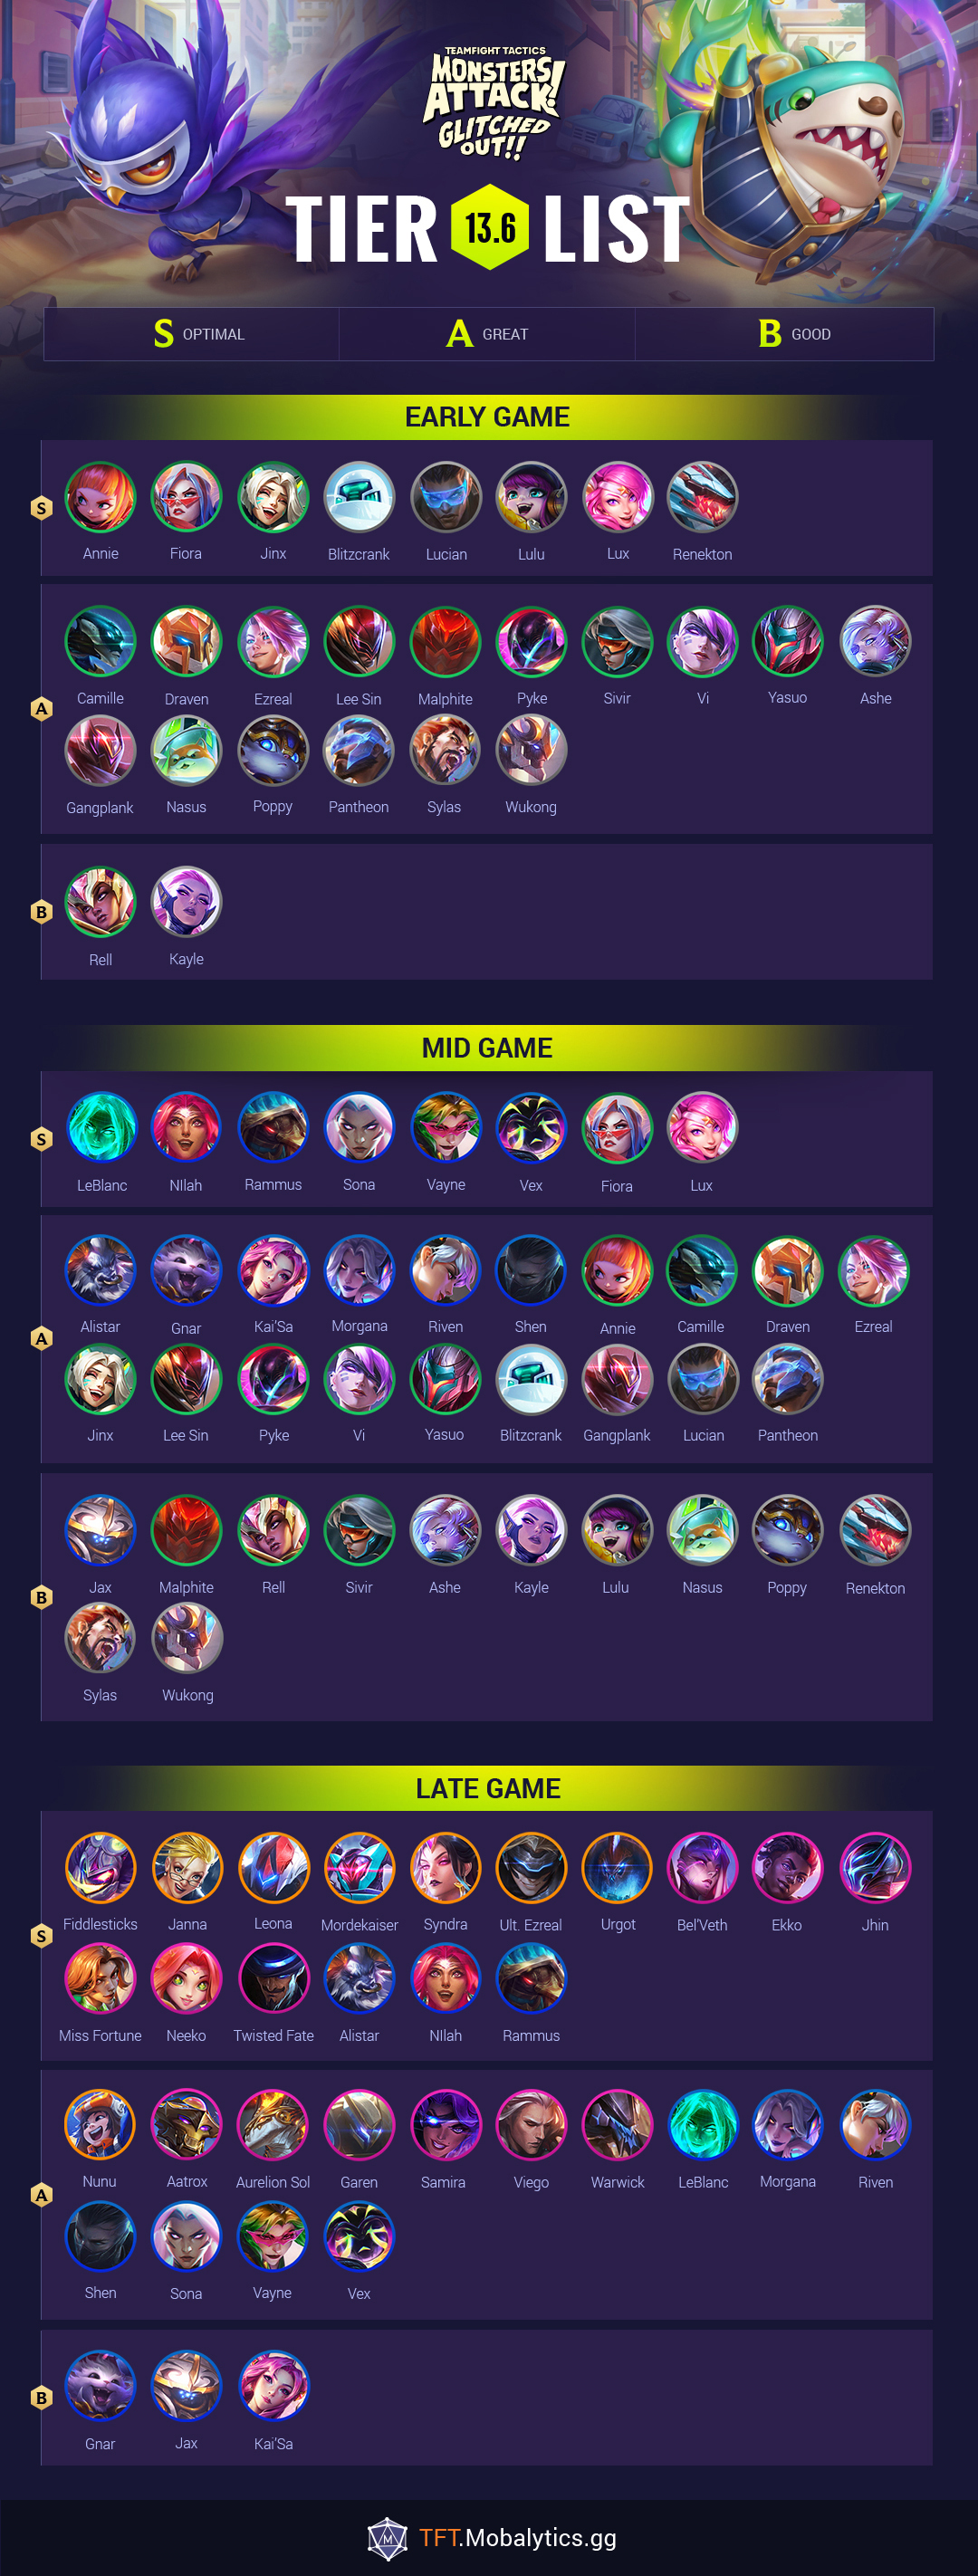 List: Best TFT Champions for Patch 13.6 Mobalytics